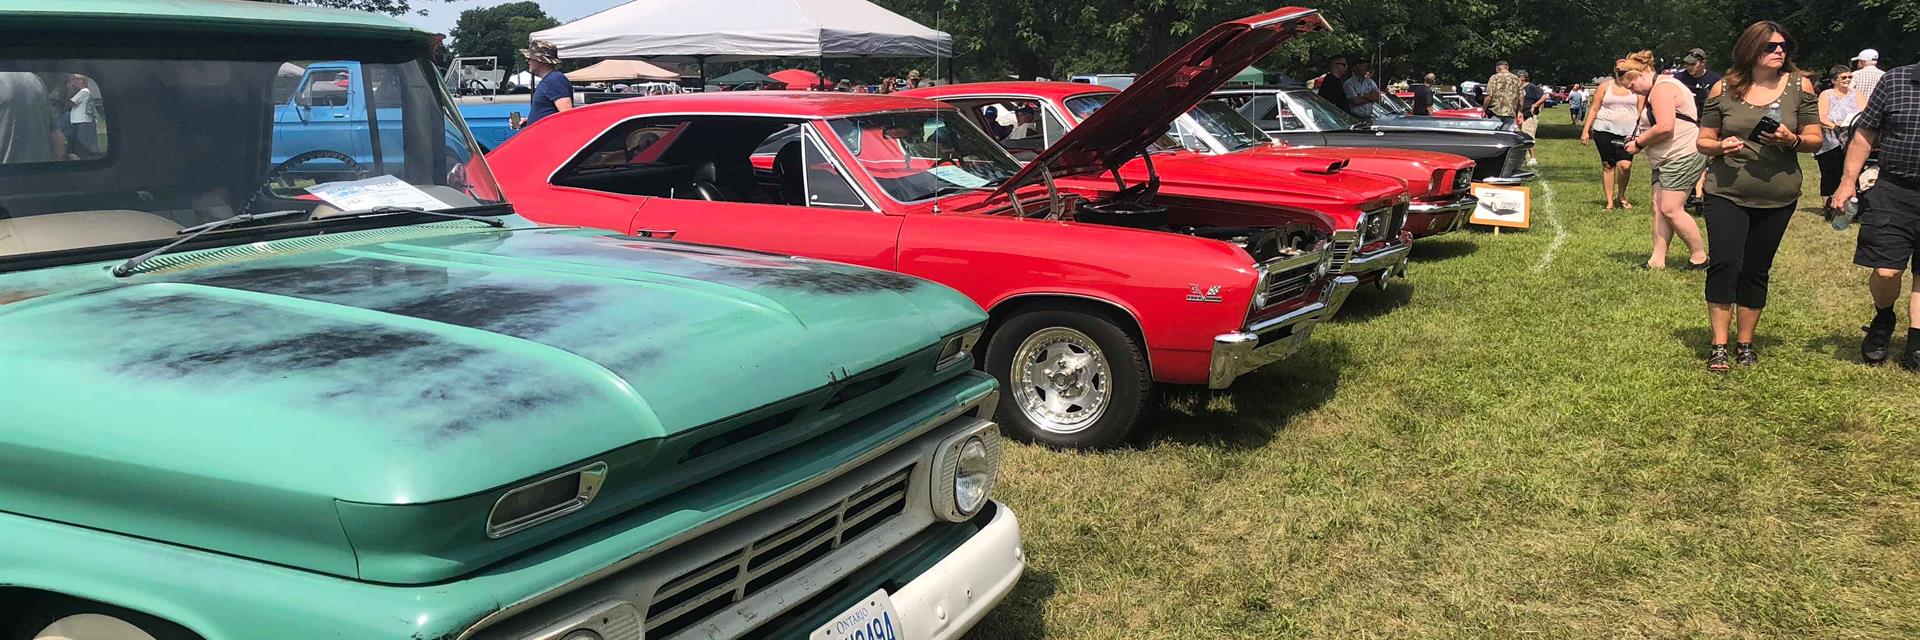 a line of brightly coloured cars on display at a classic car show in chatham-kent